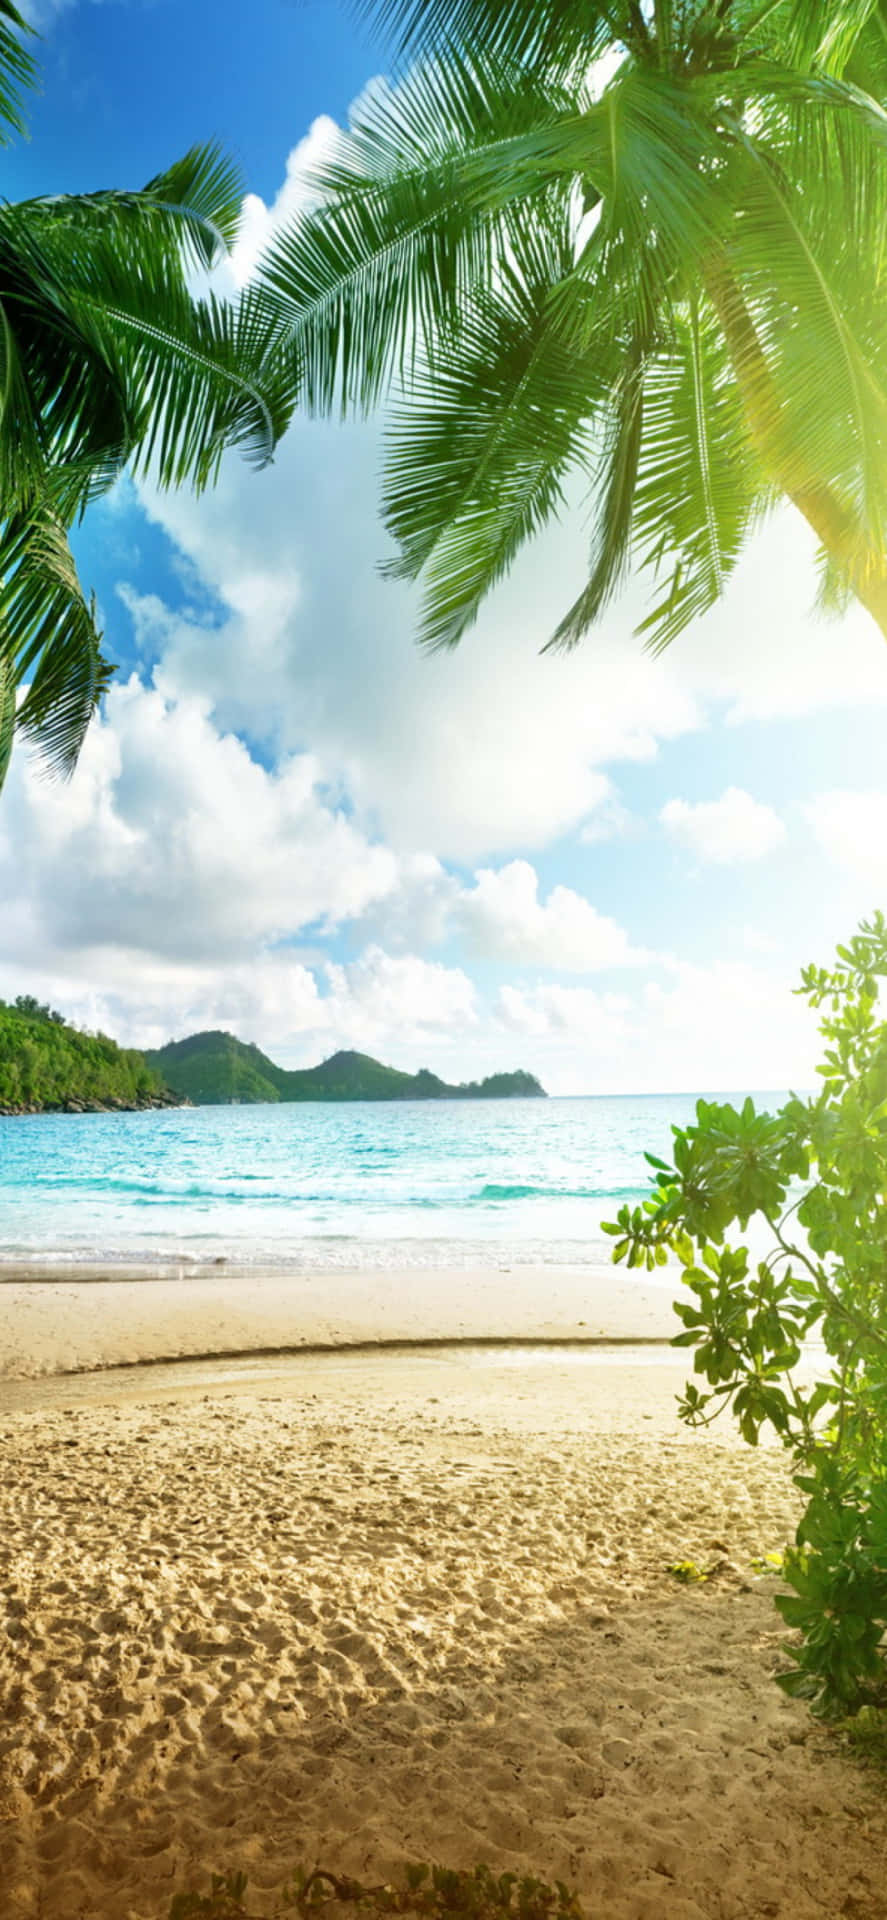 Tropical Beach With Palm Trees And Ocean Wallpaper